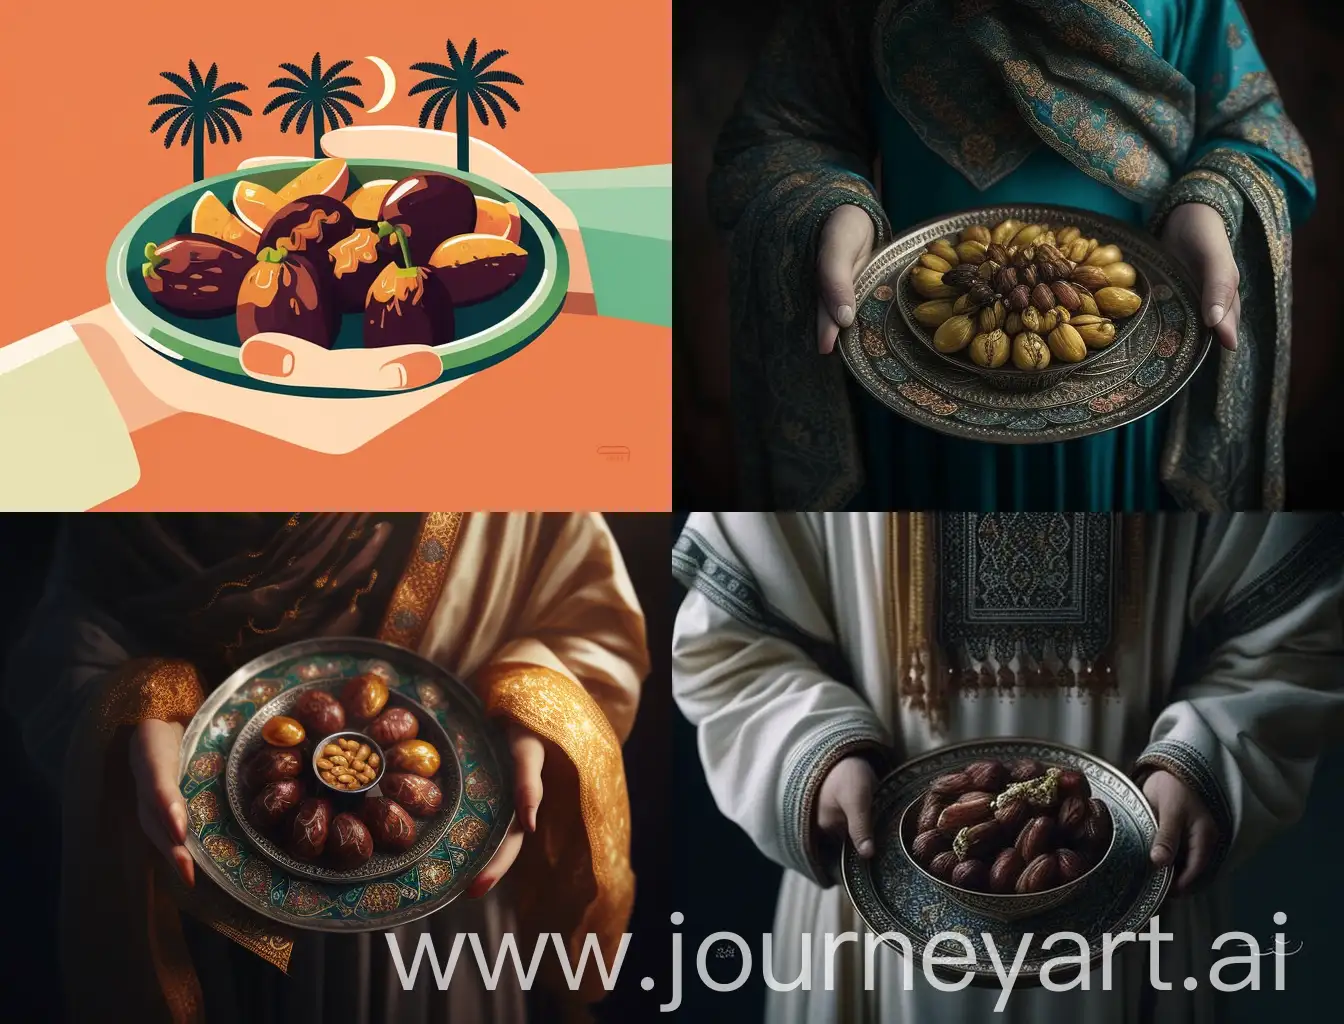 Generous-Gesture-Offering-Dates-for-Charity-in-Arab-Culture